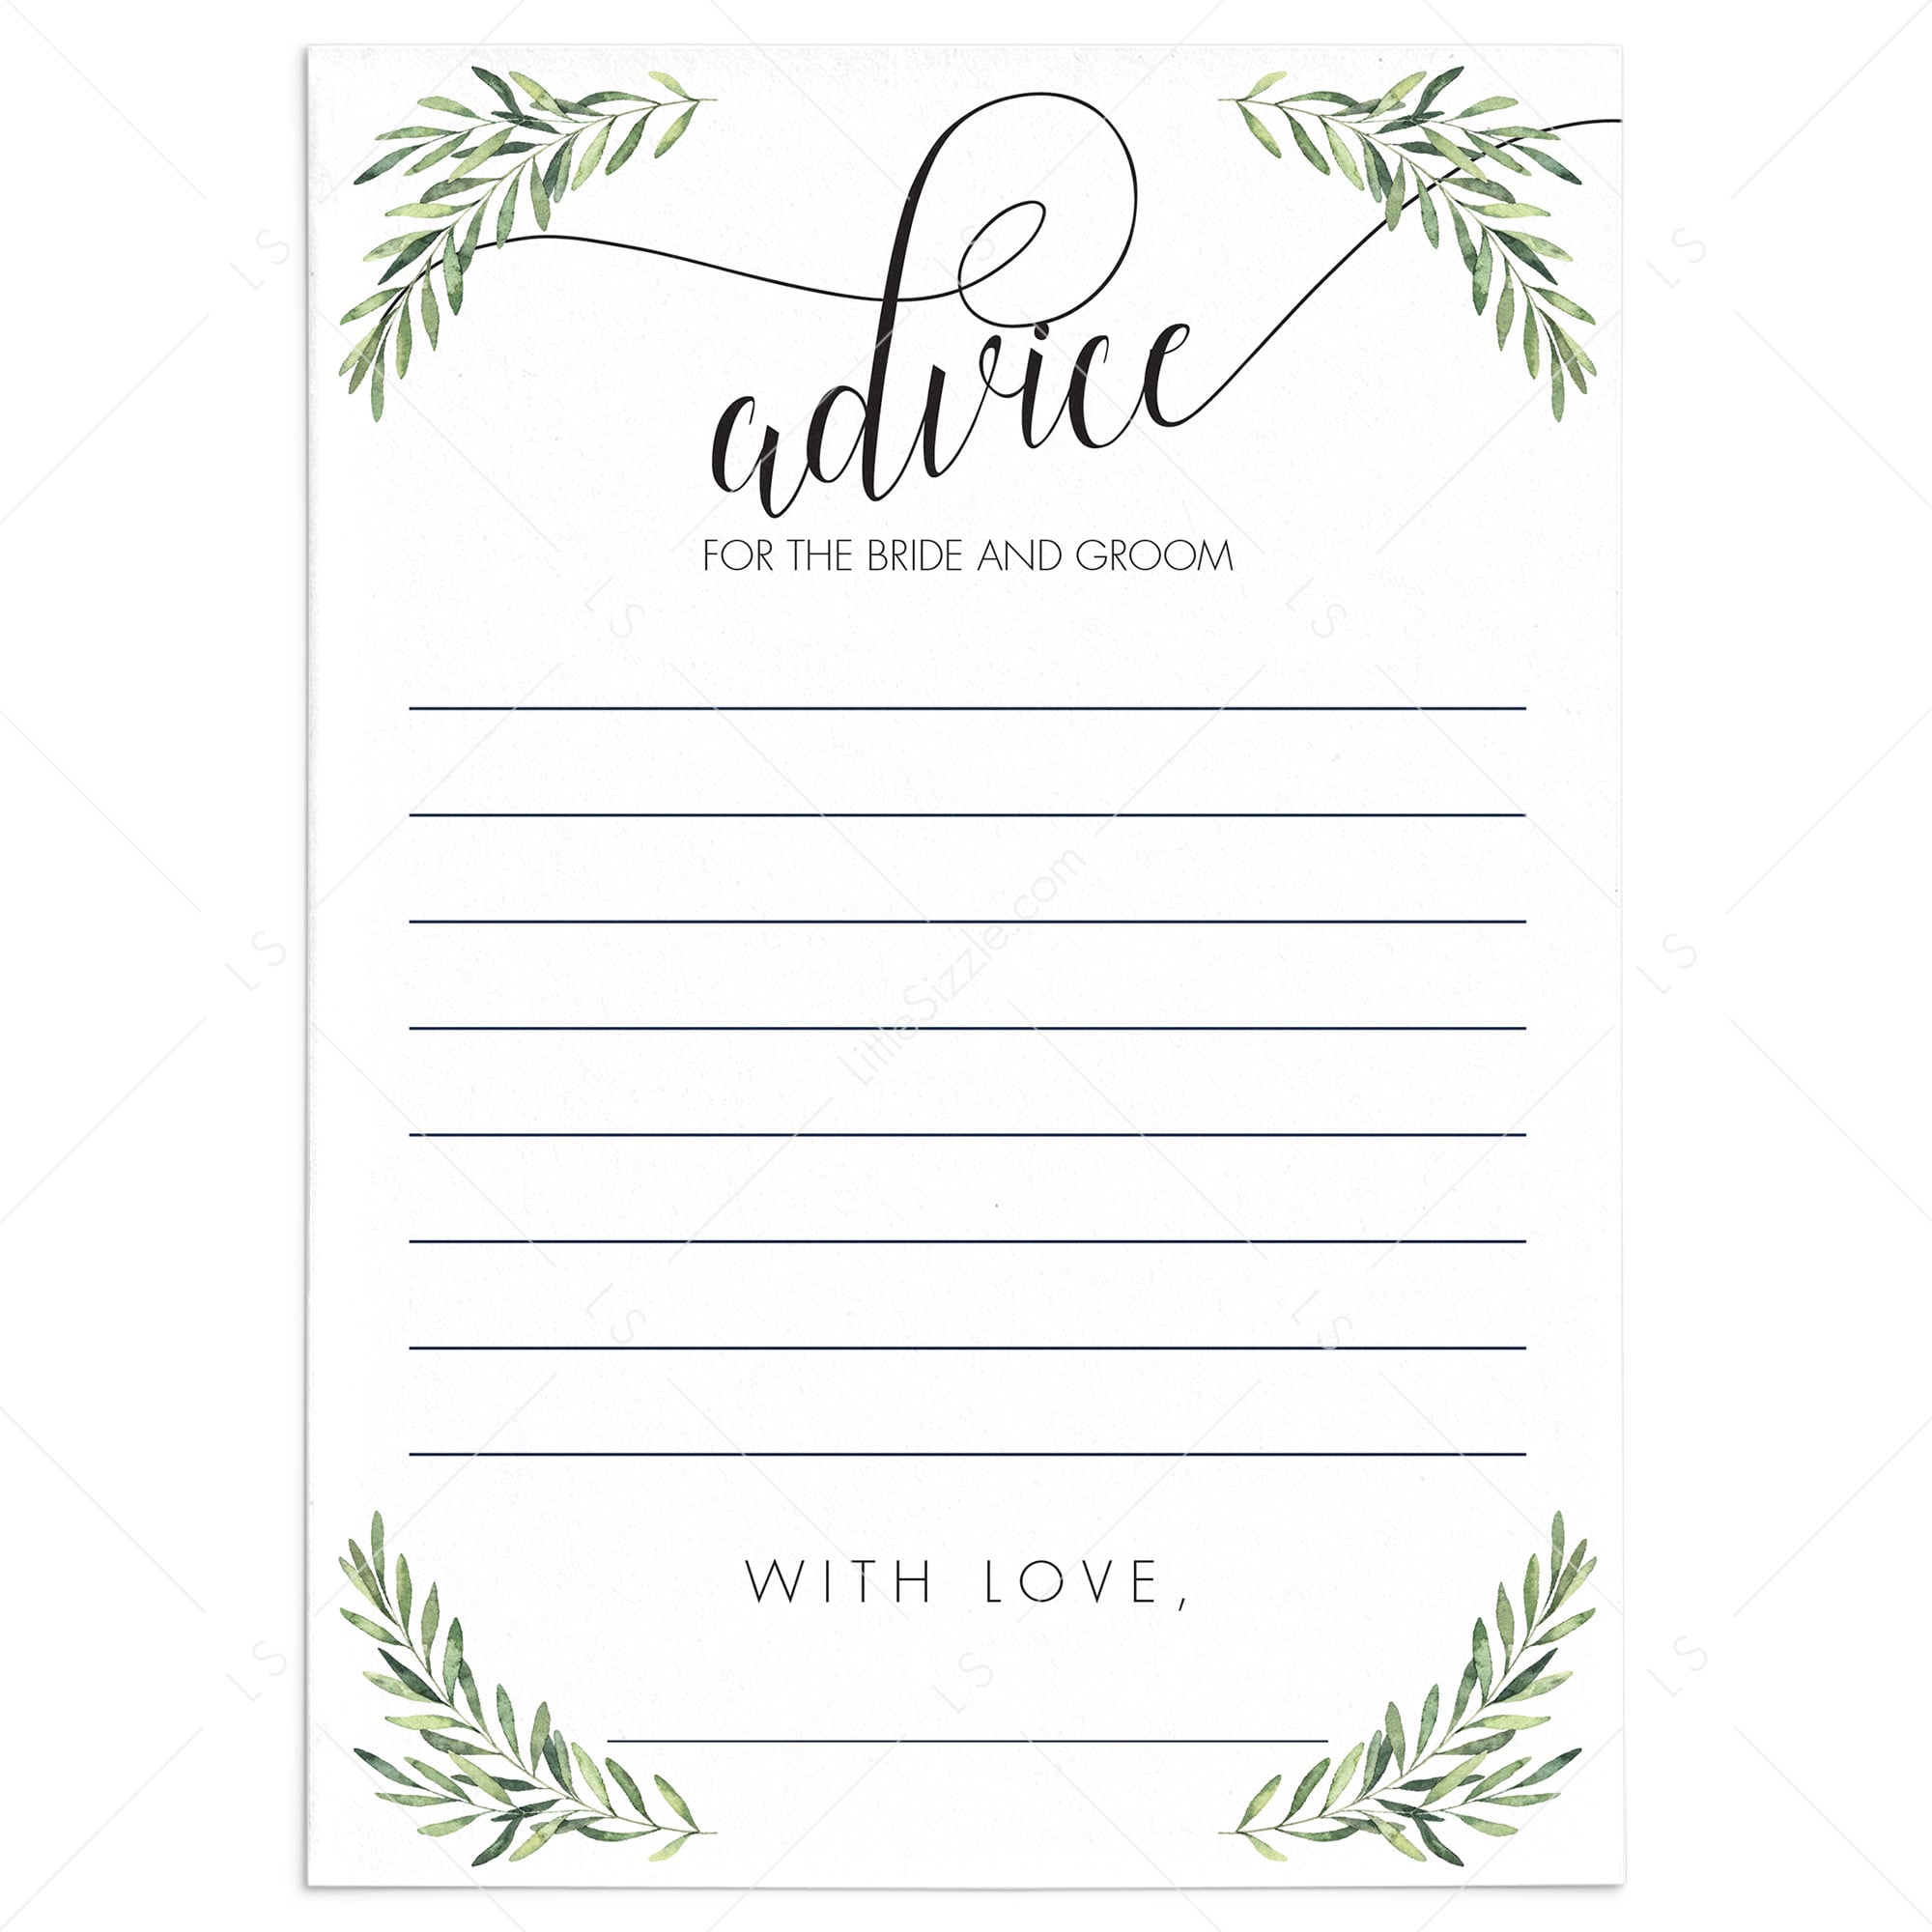 Greenery Wedding Advice Cards Instant Download by LittleSizzle